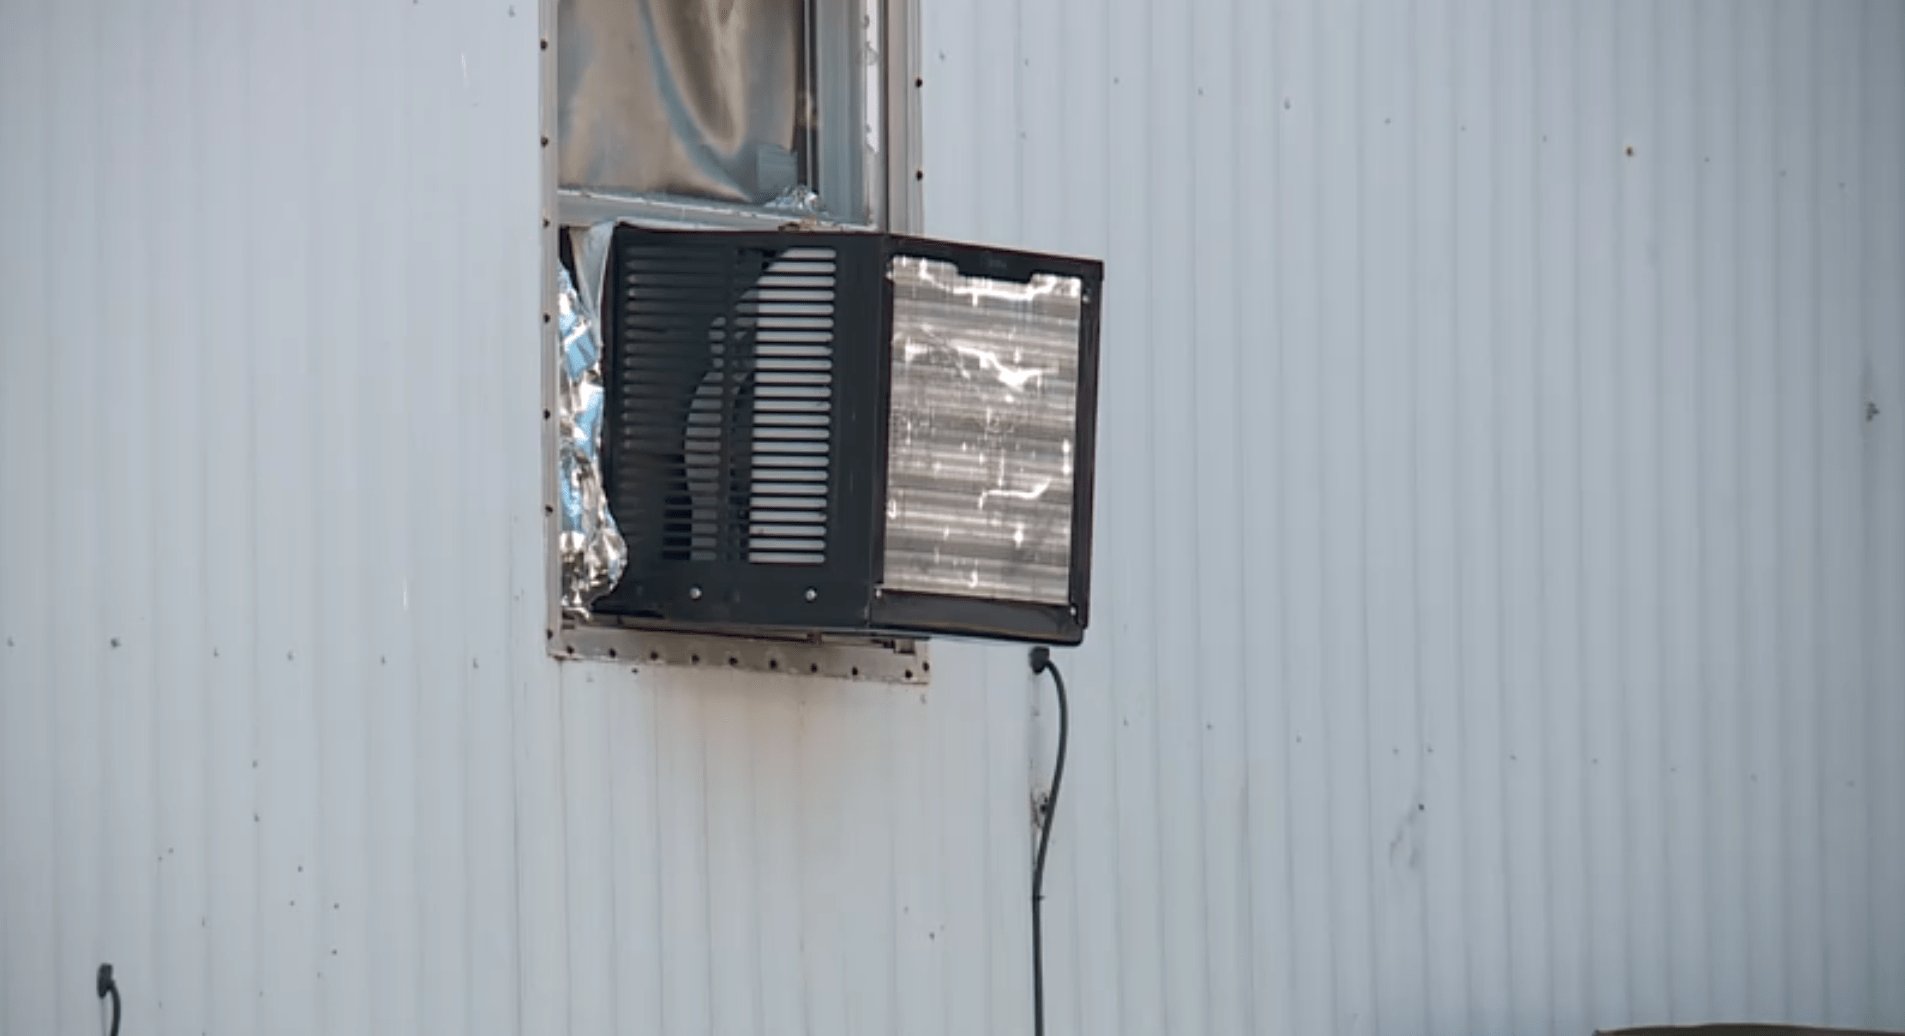 Air conditioning unit in window. Image KFOR.